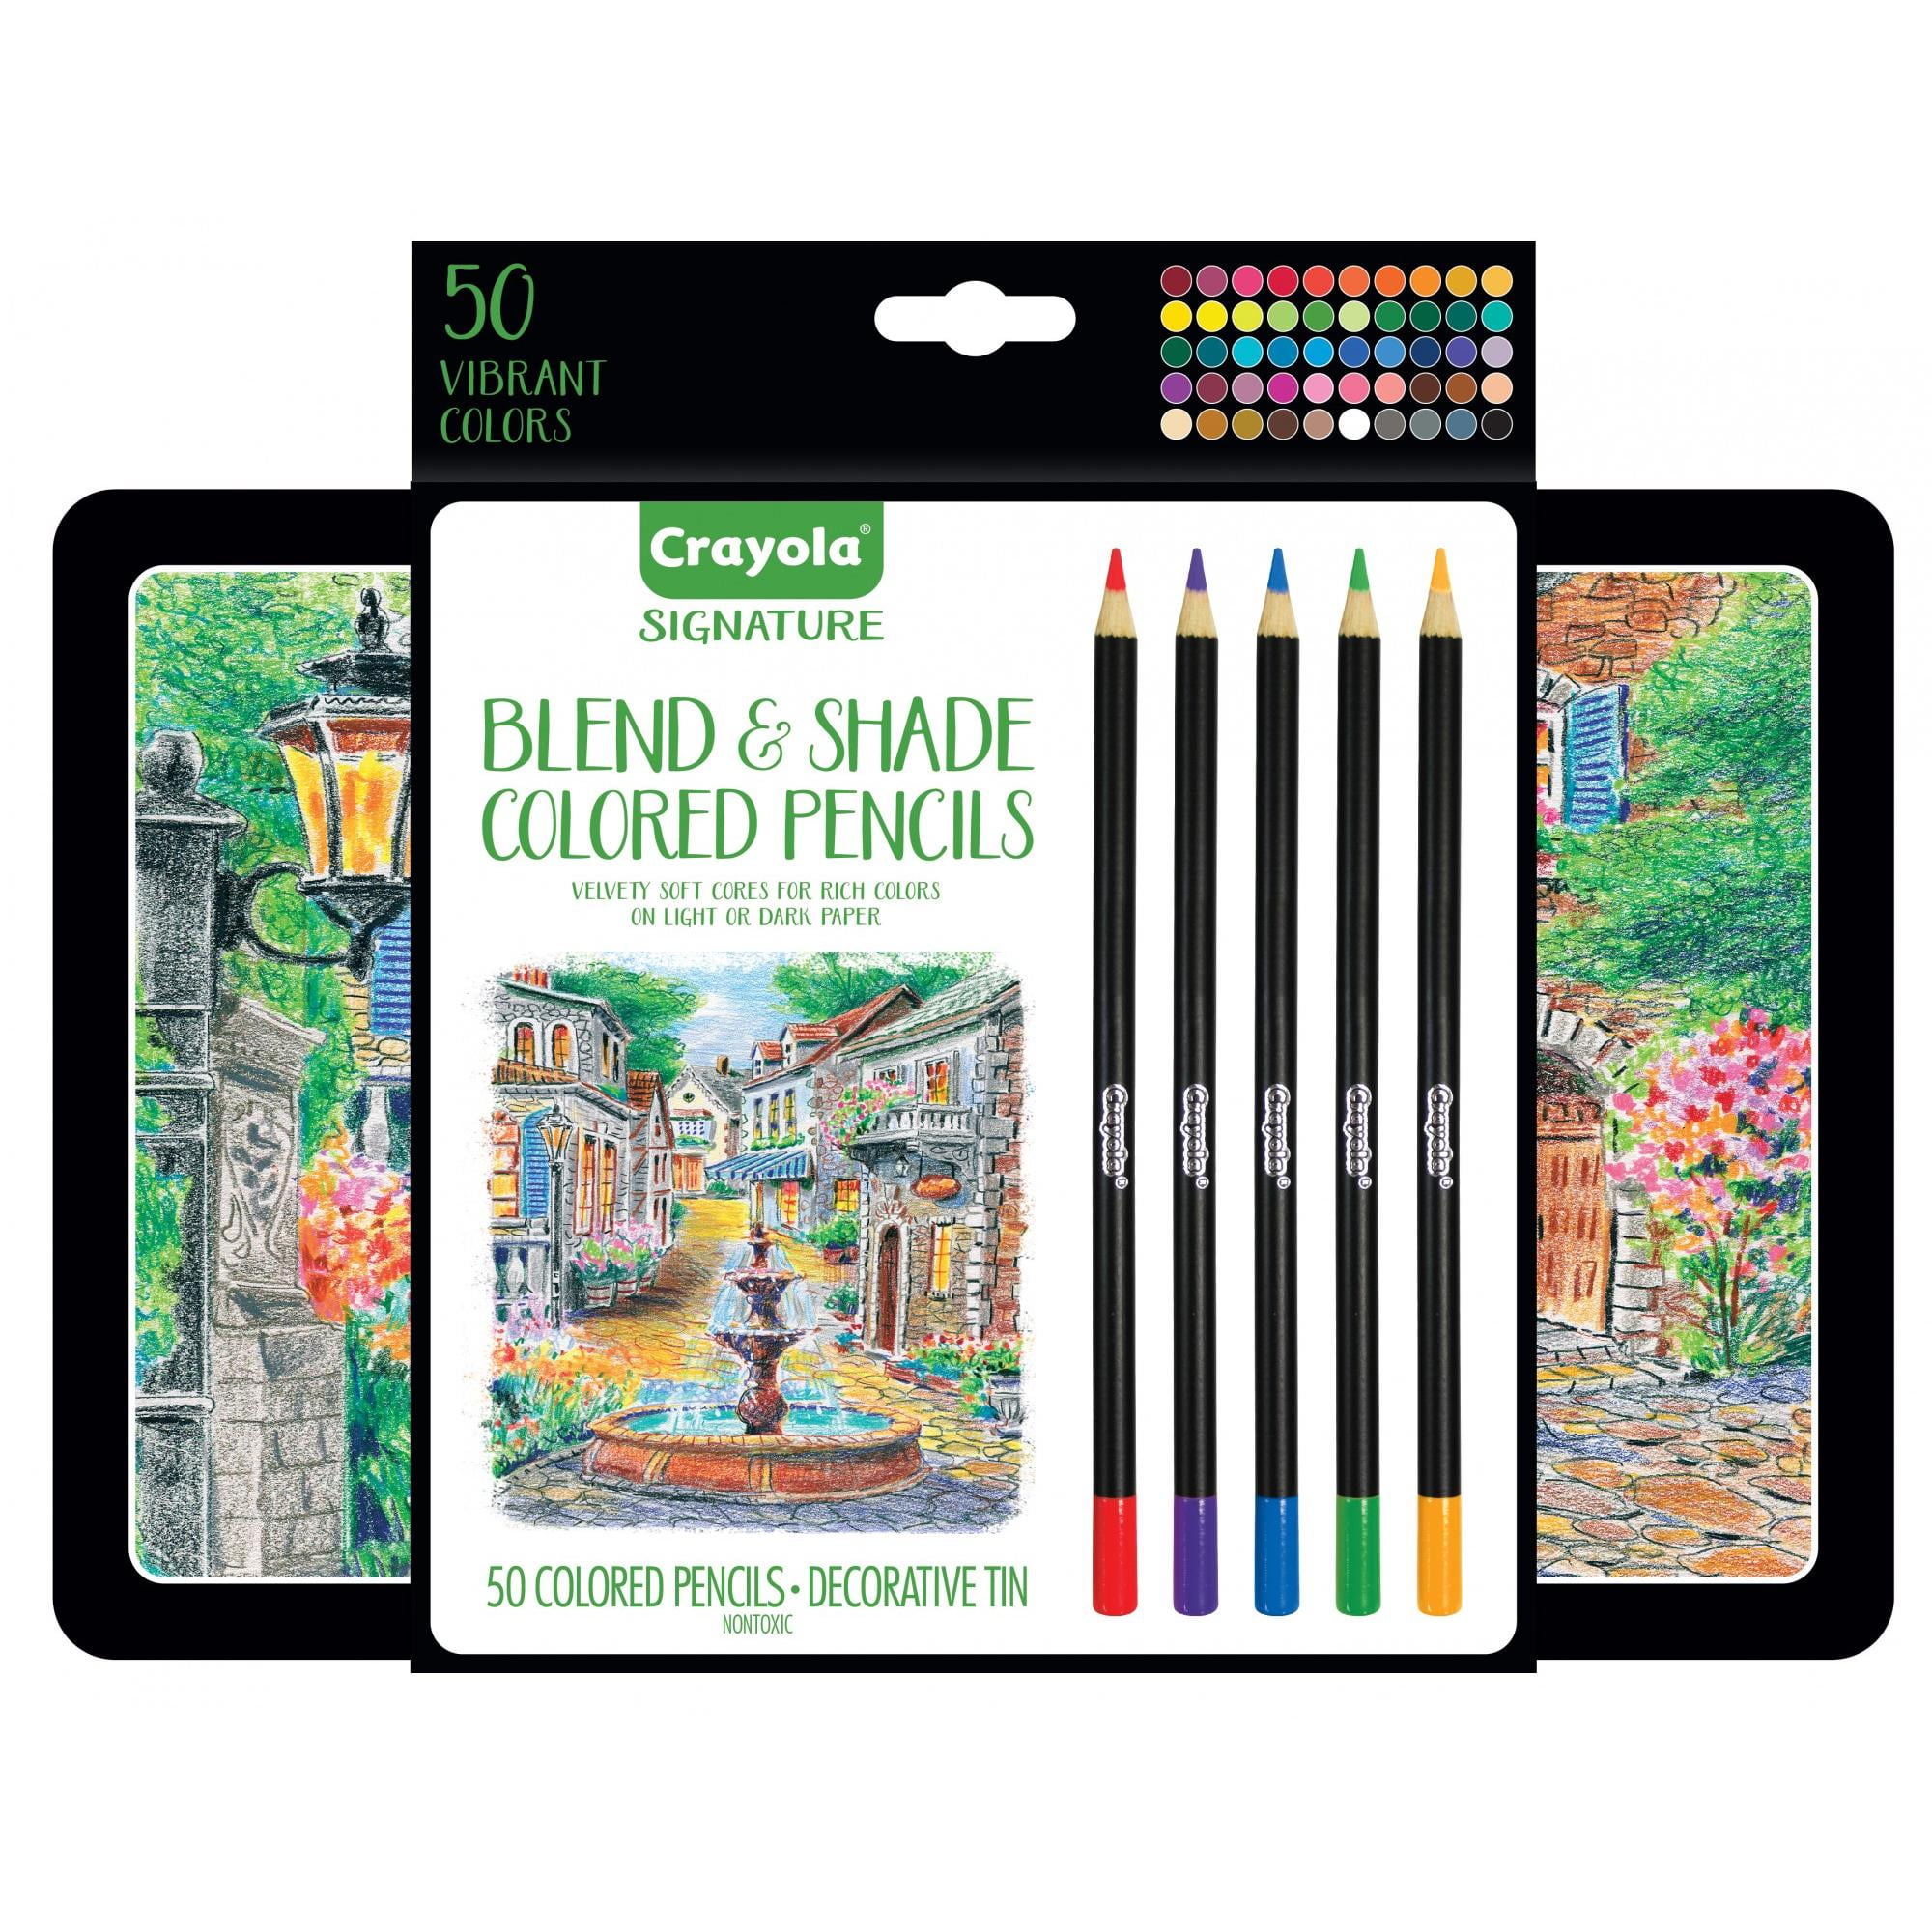 Crayola Signature Blend & Shade Colored Pencil Set with Decorative 